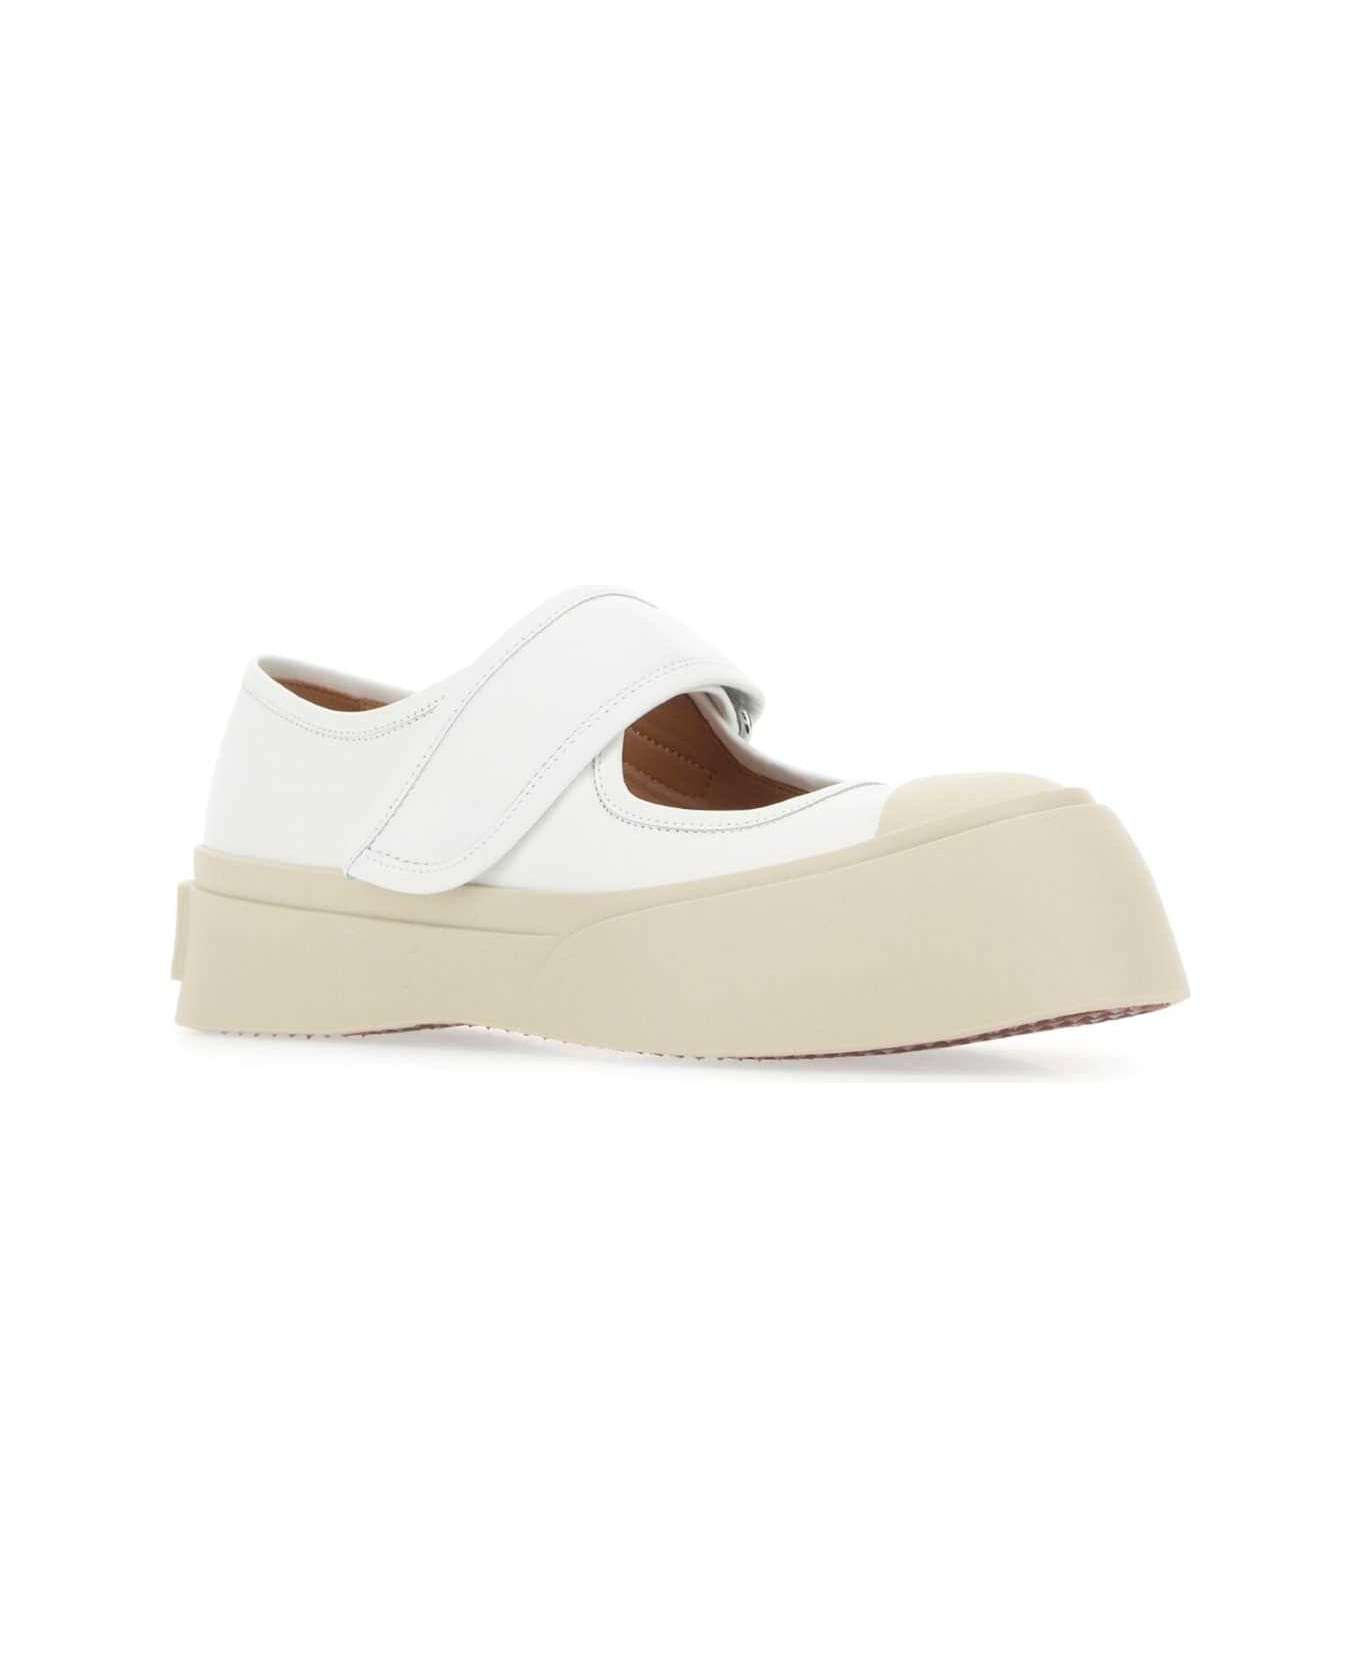 Marni White Leather Mary Jane Sneakers - 00W01